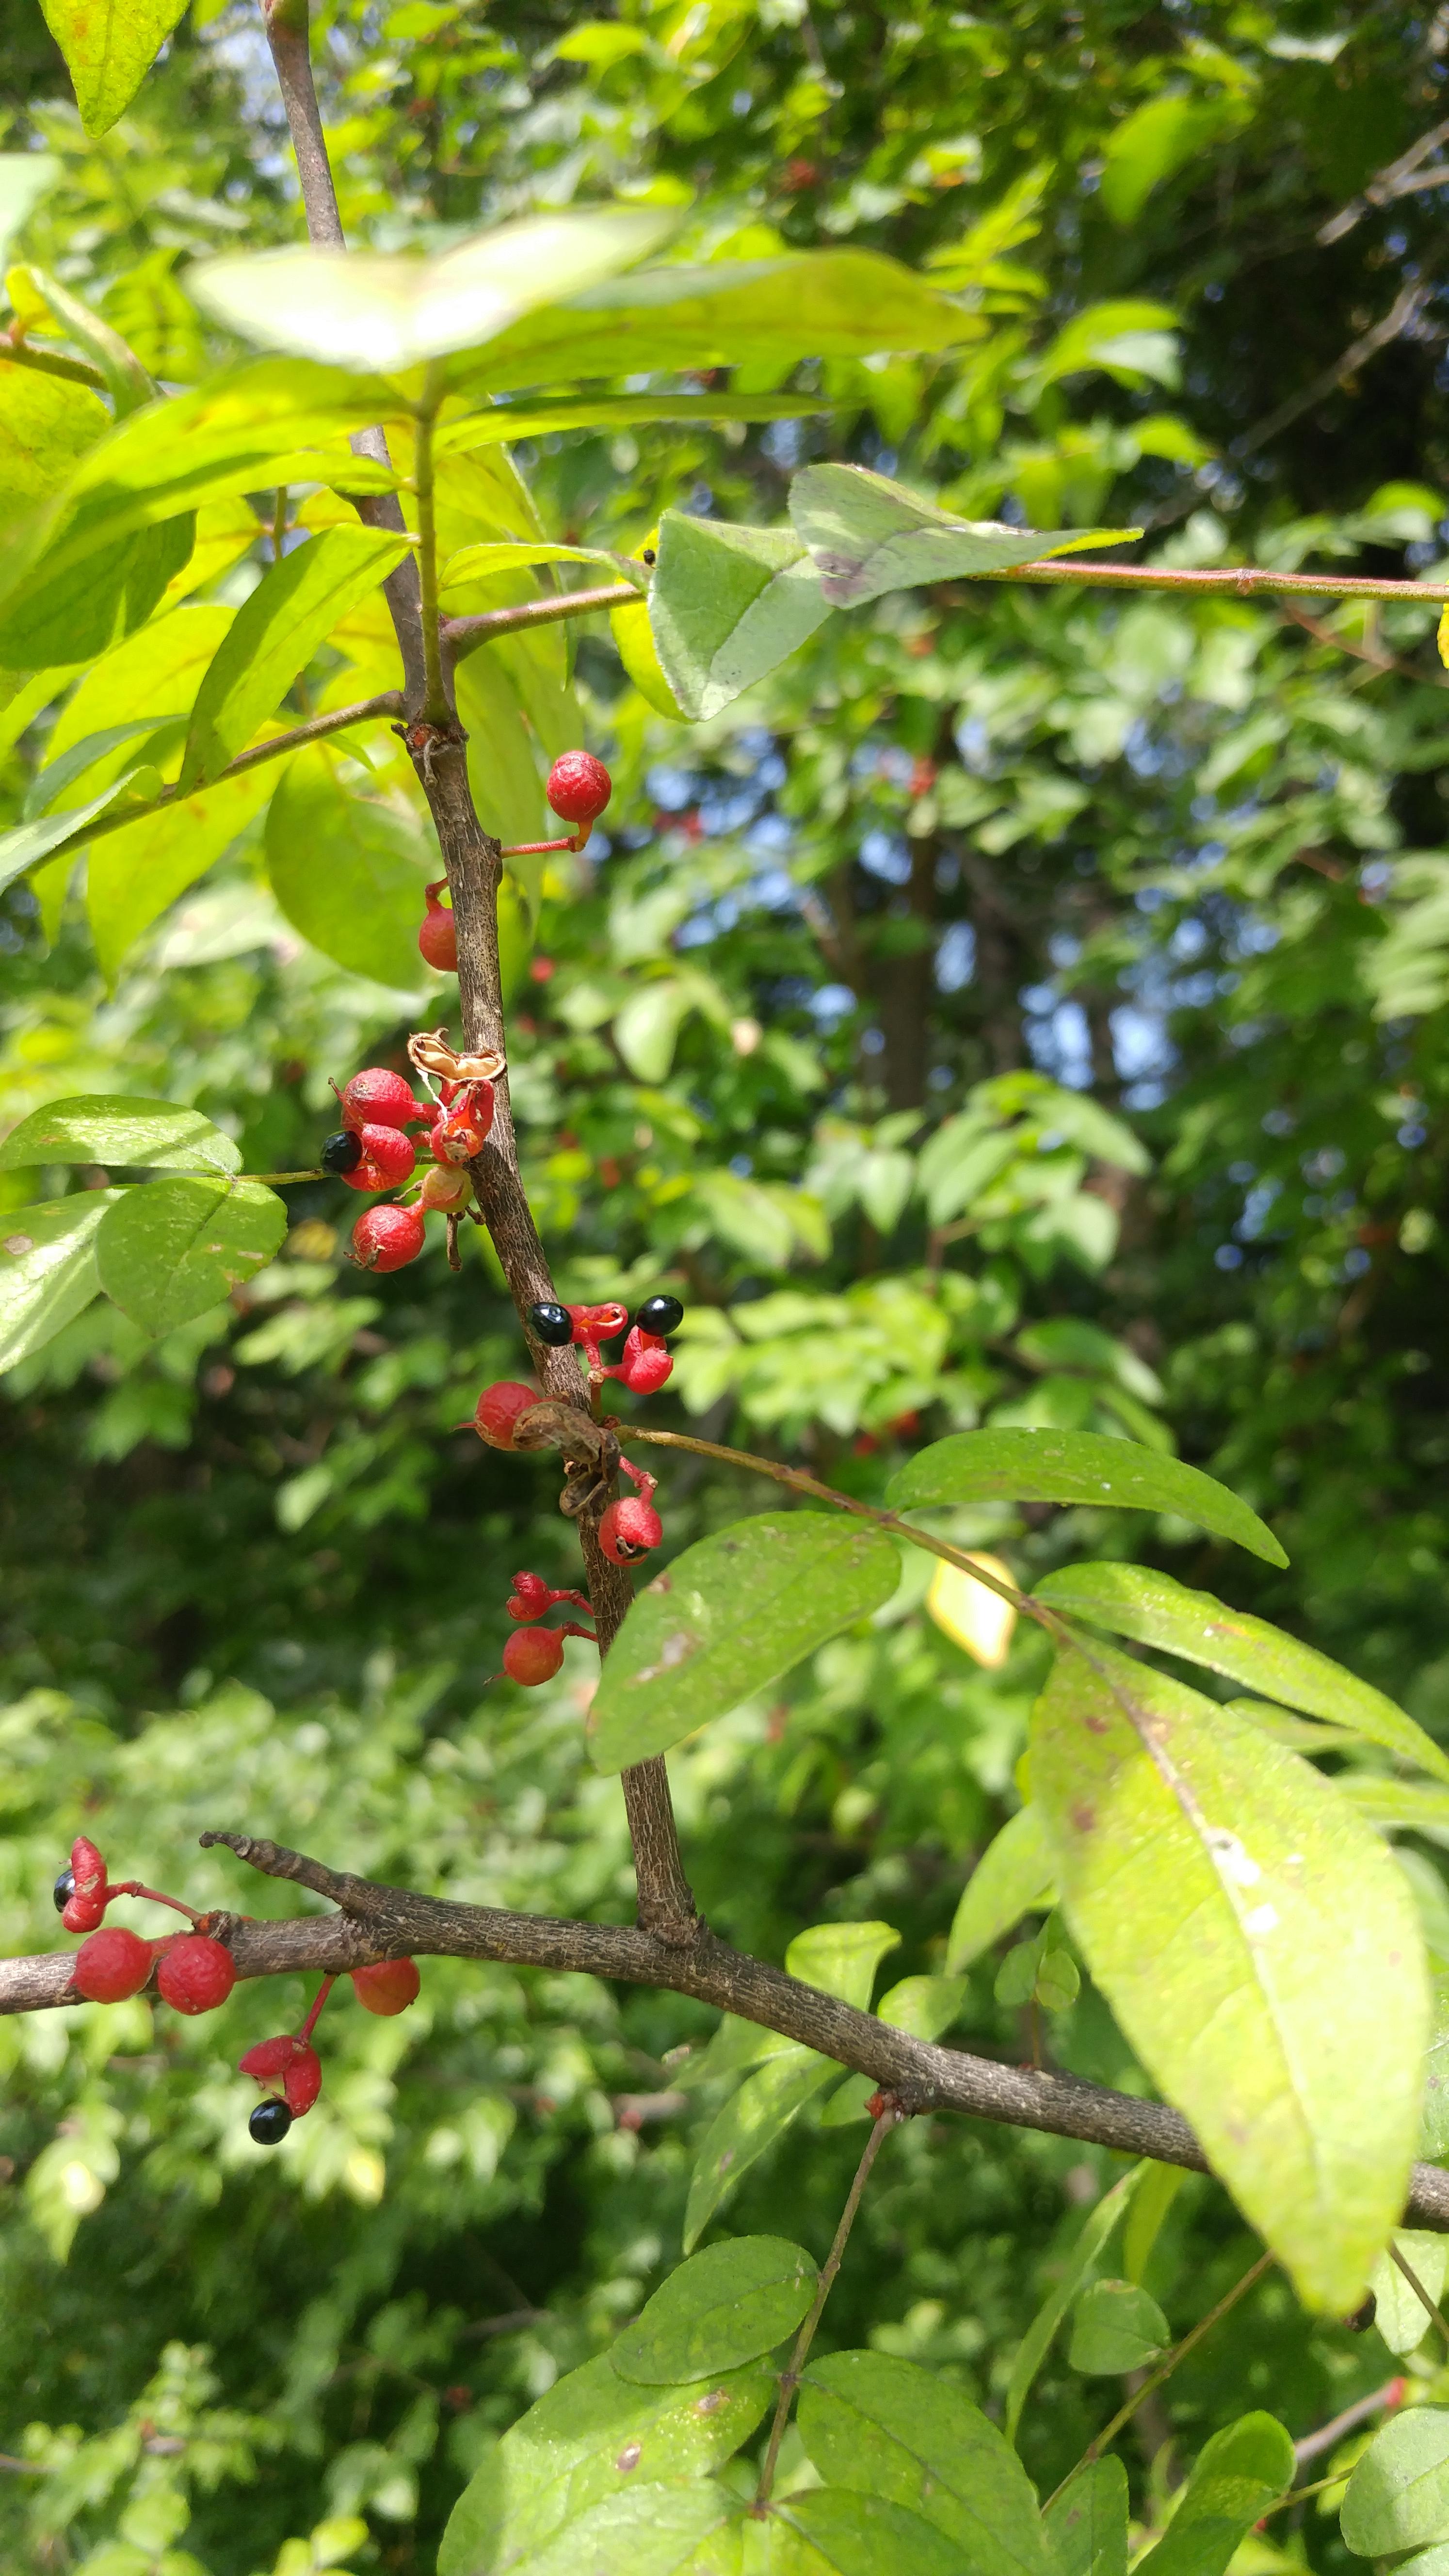 Small tree. Little red berries with little red seeds inside. - Album ...